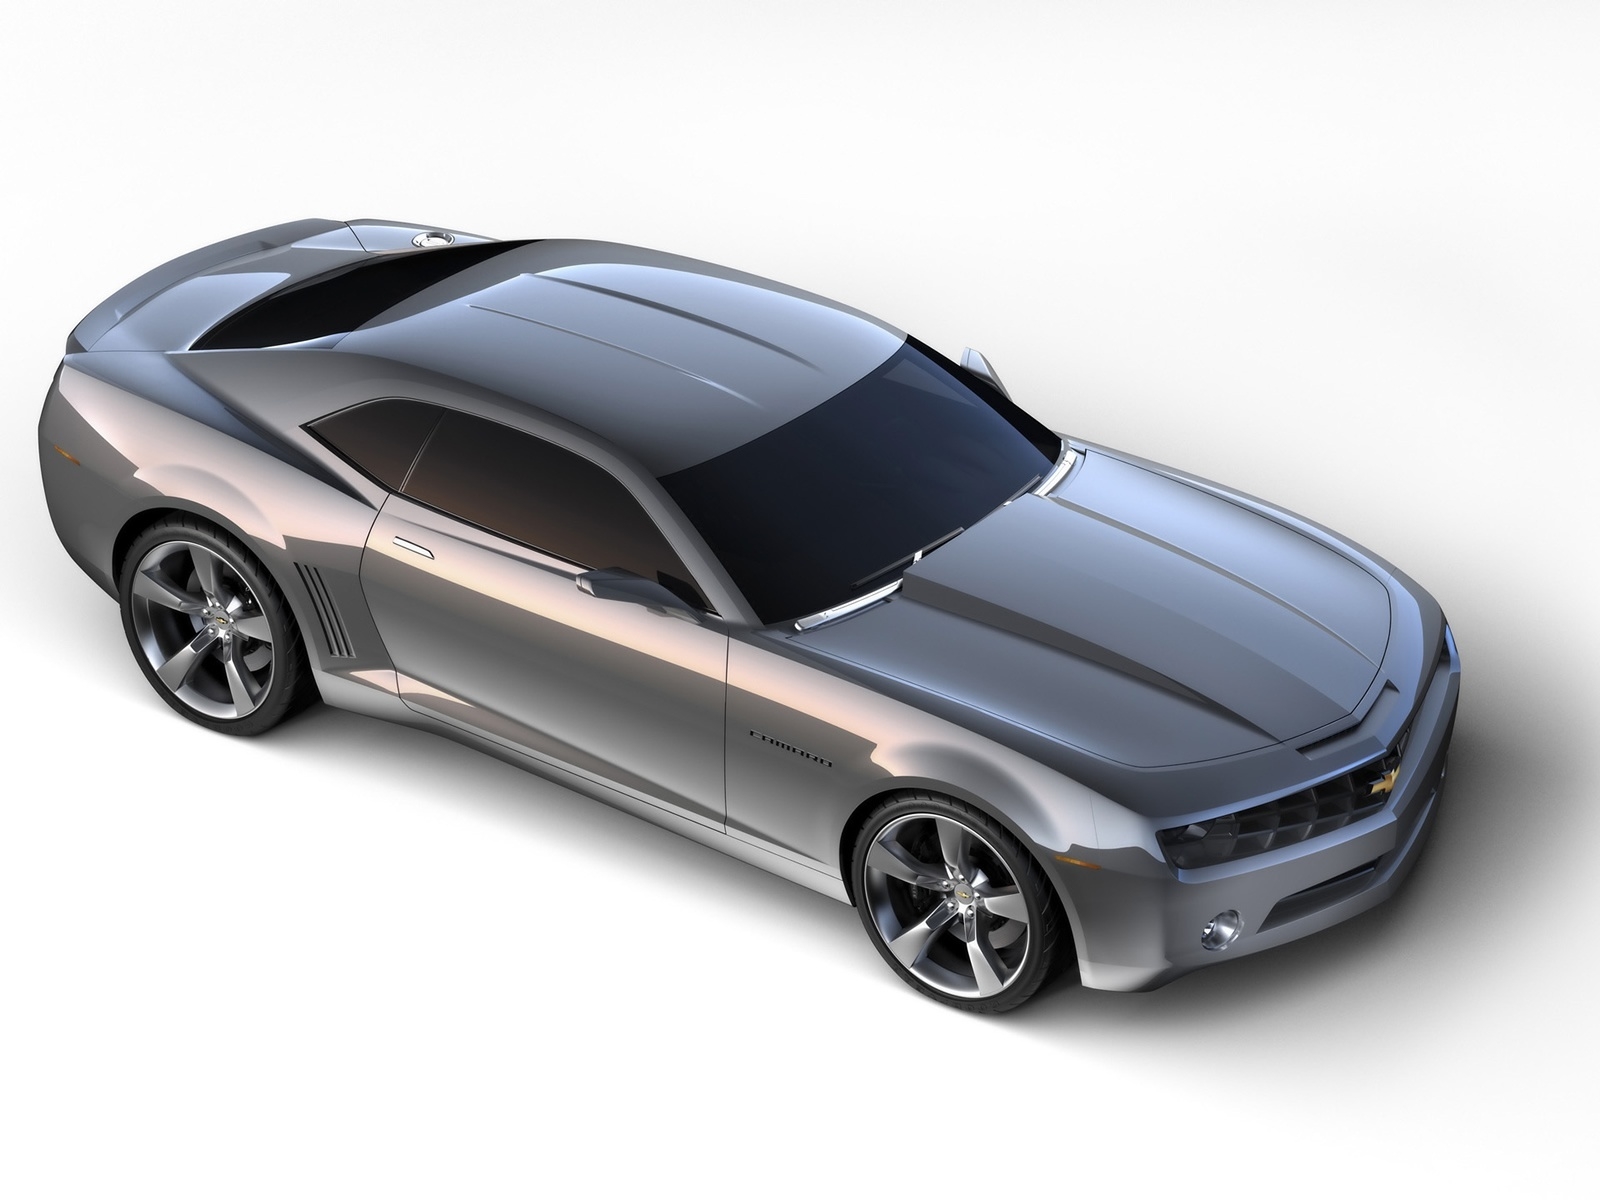 Chevrolet Camaro Grey Side Angle for 1600 x 1200 resolution